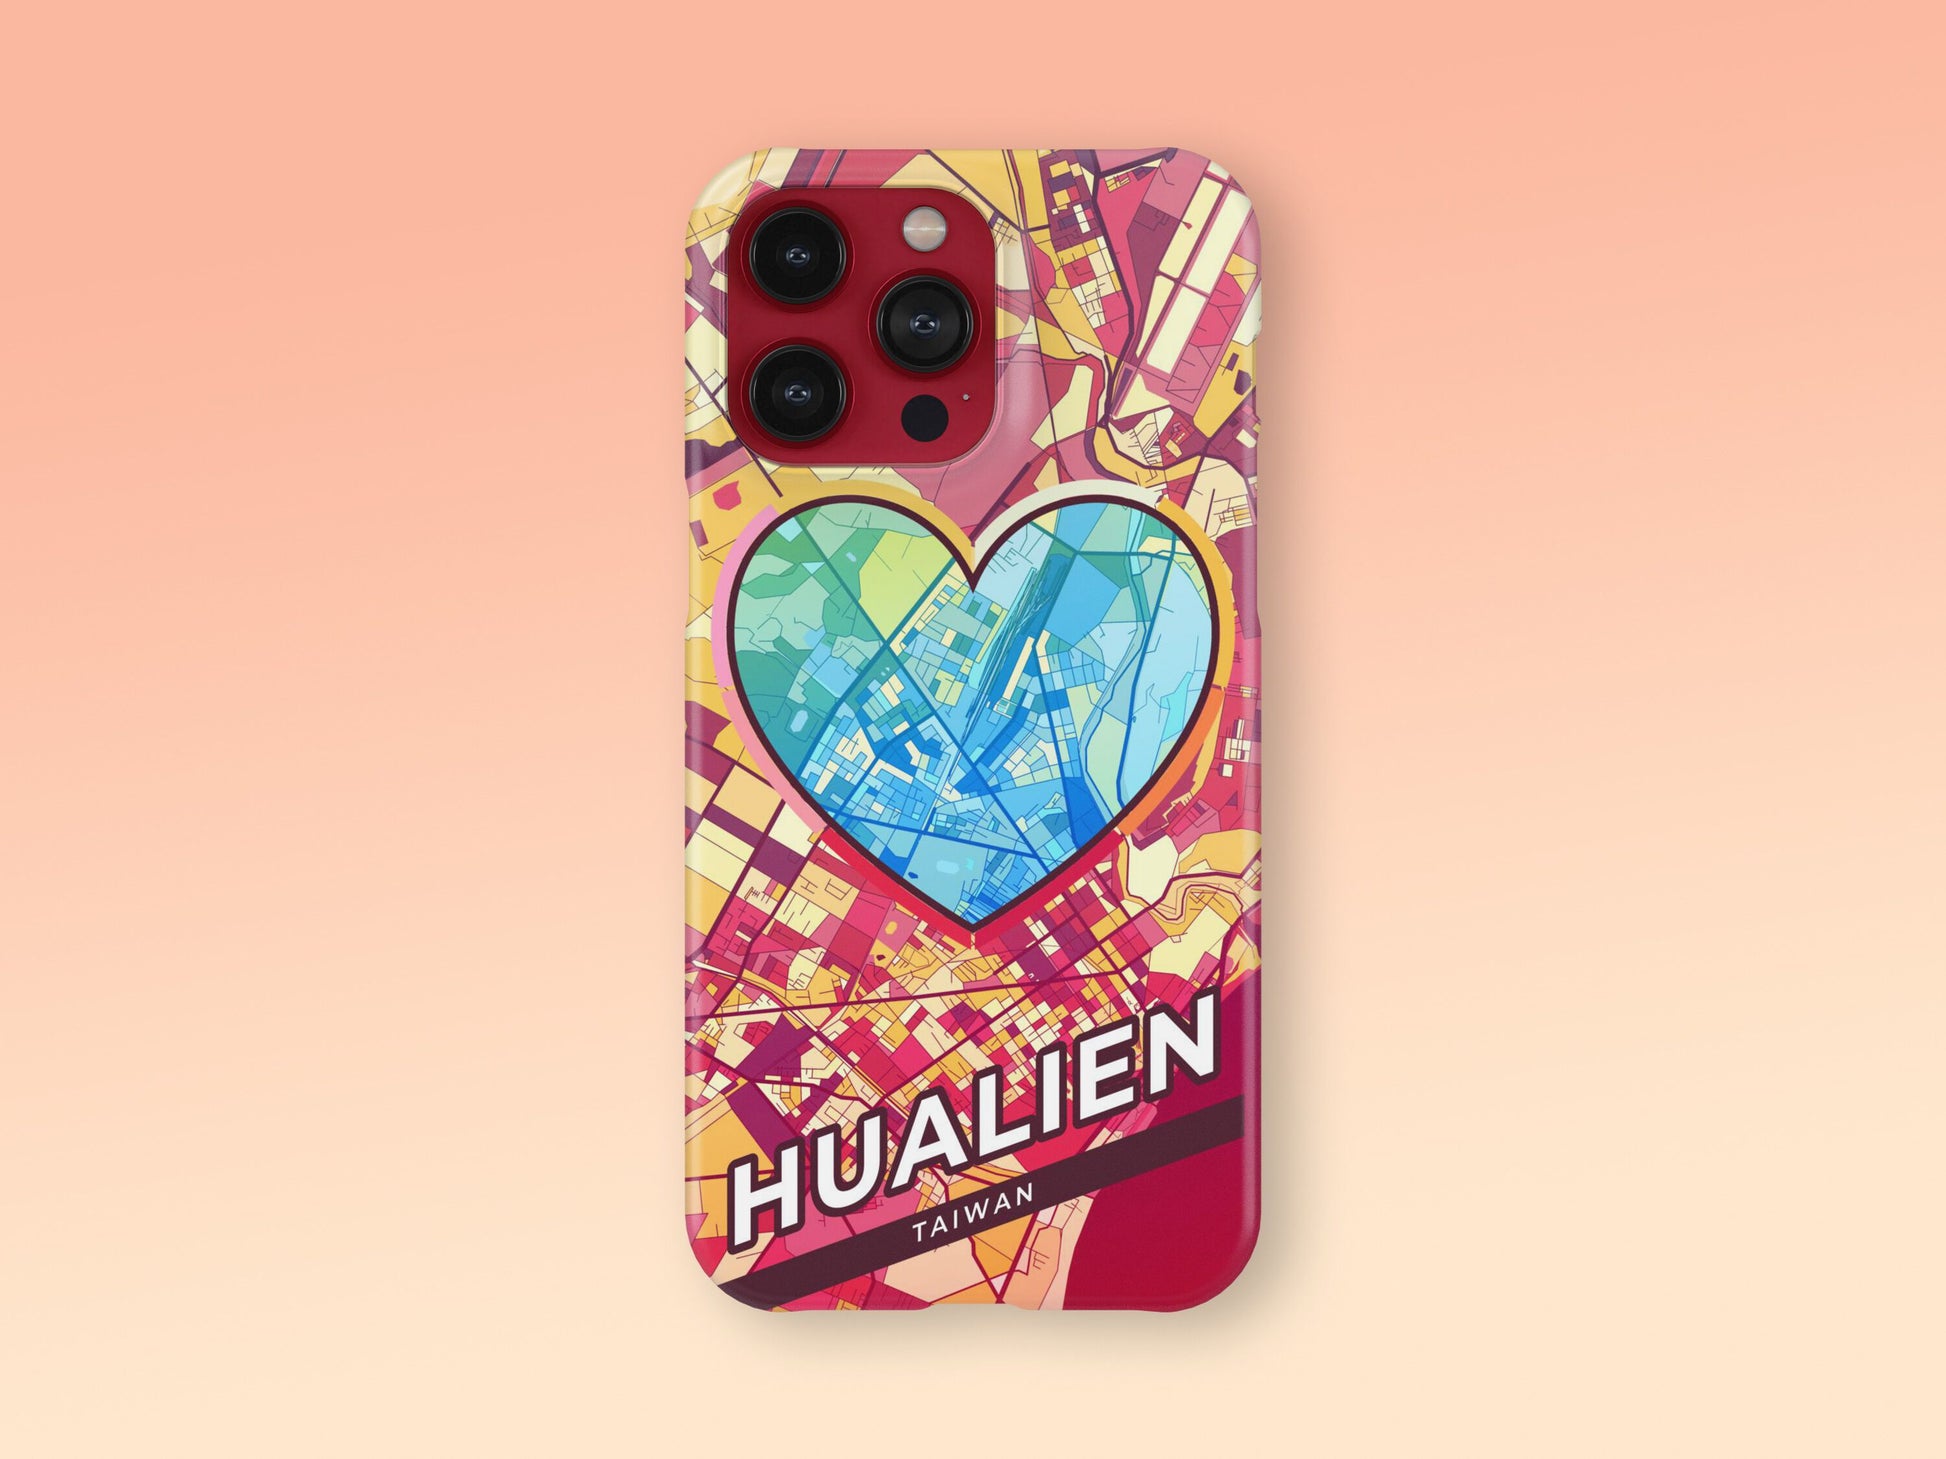 Hualien Taiwan slim phone case with colorful icon. Birthday, wedding or housewarming gift. Couple match cases. 2